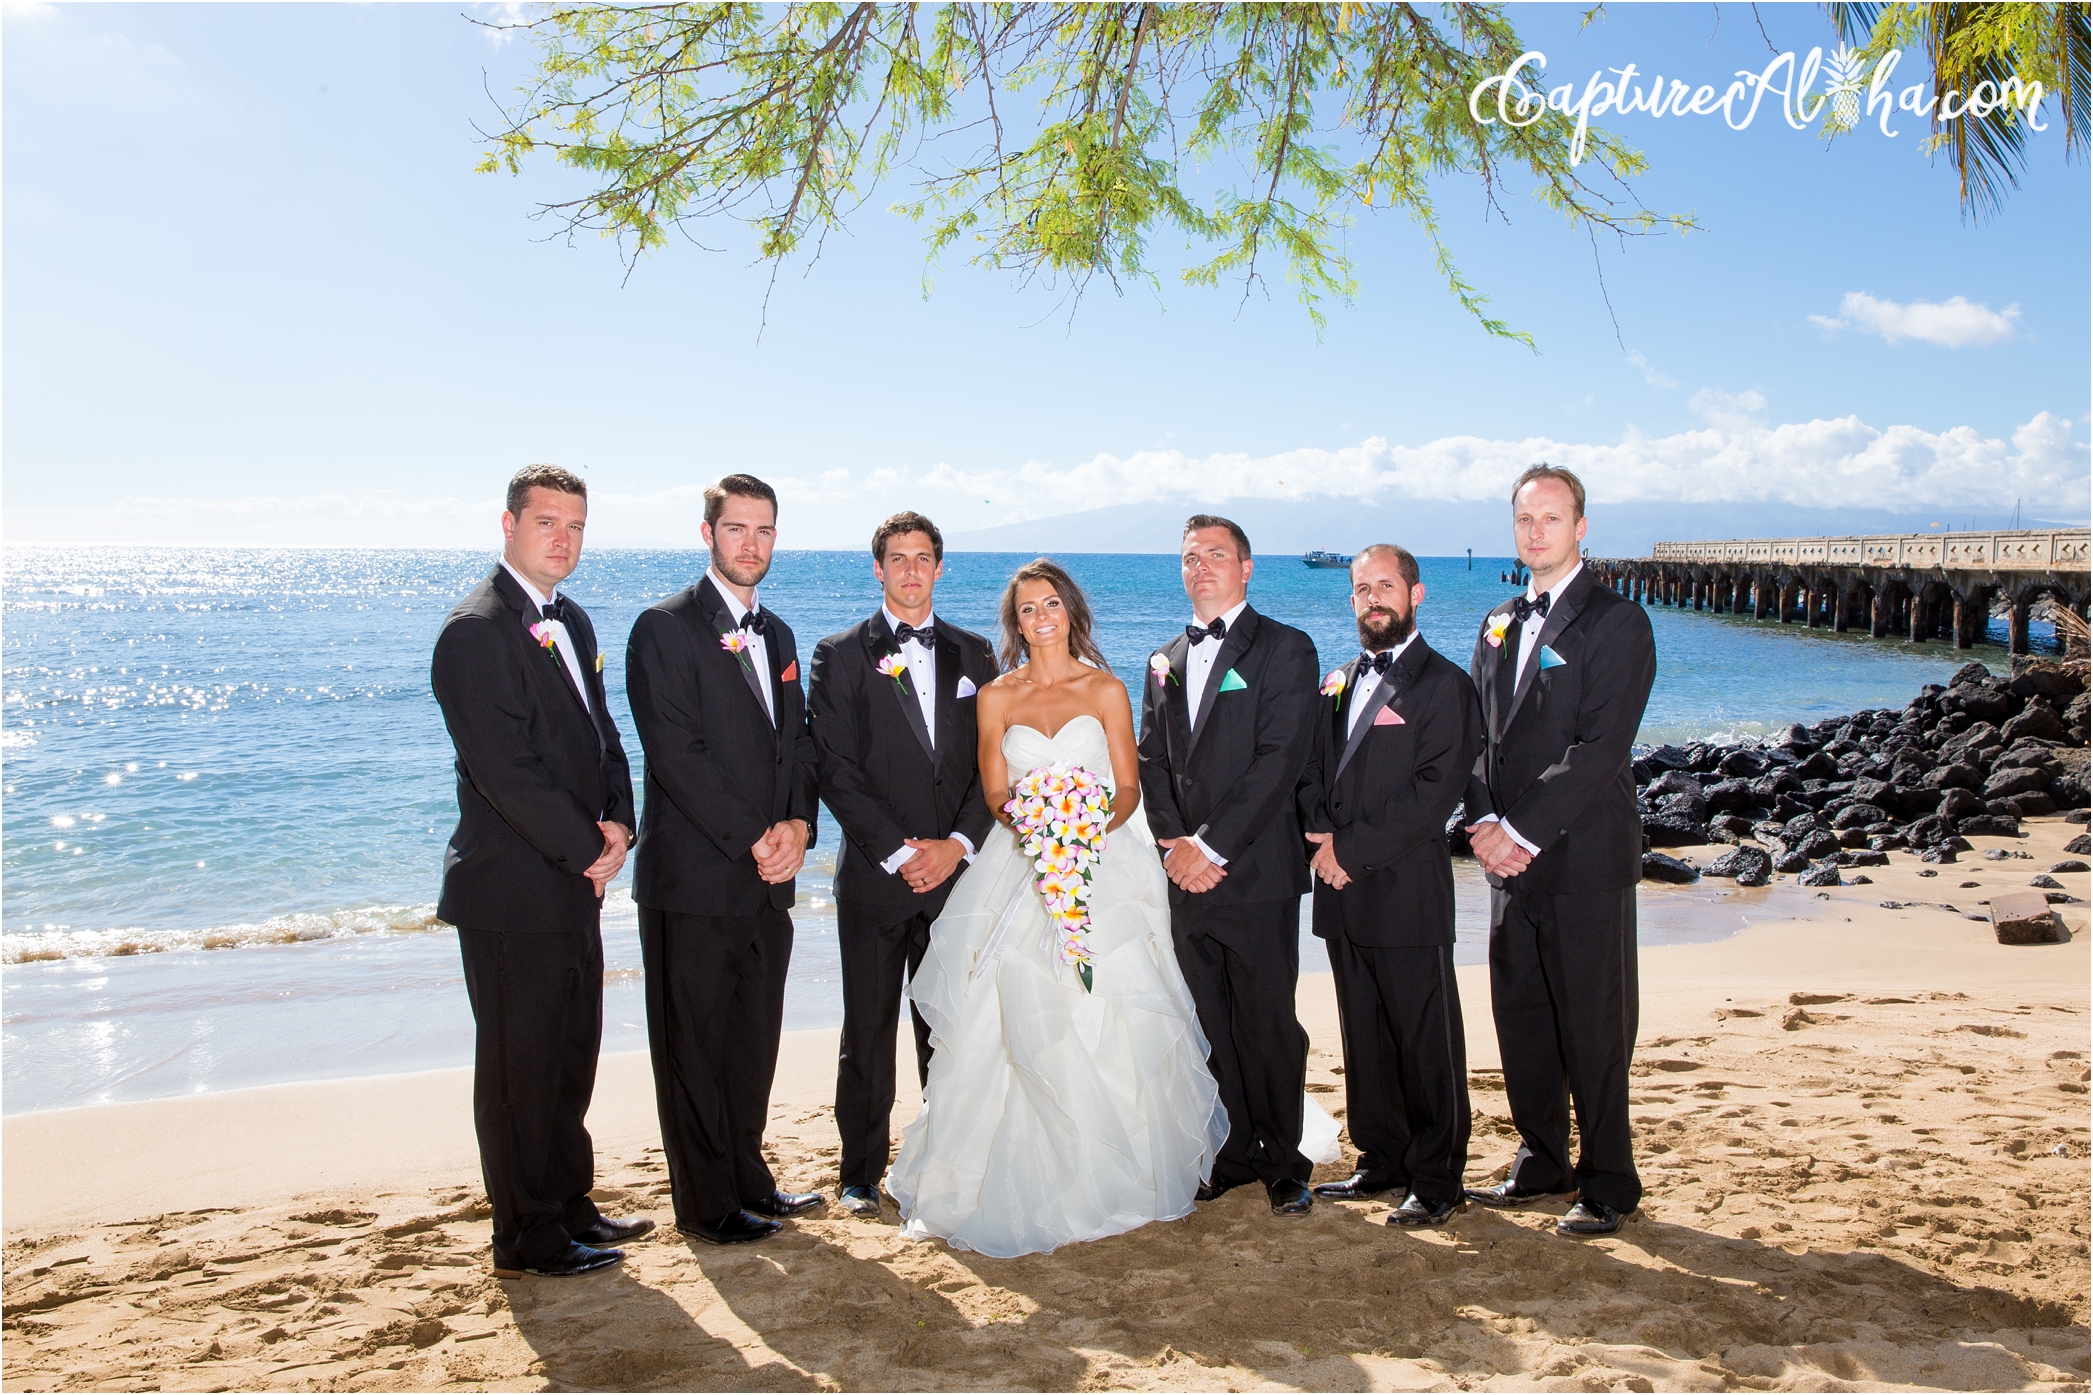 Maui Wedding Photography at the beach with the bridal party